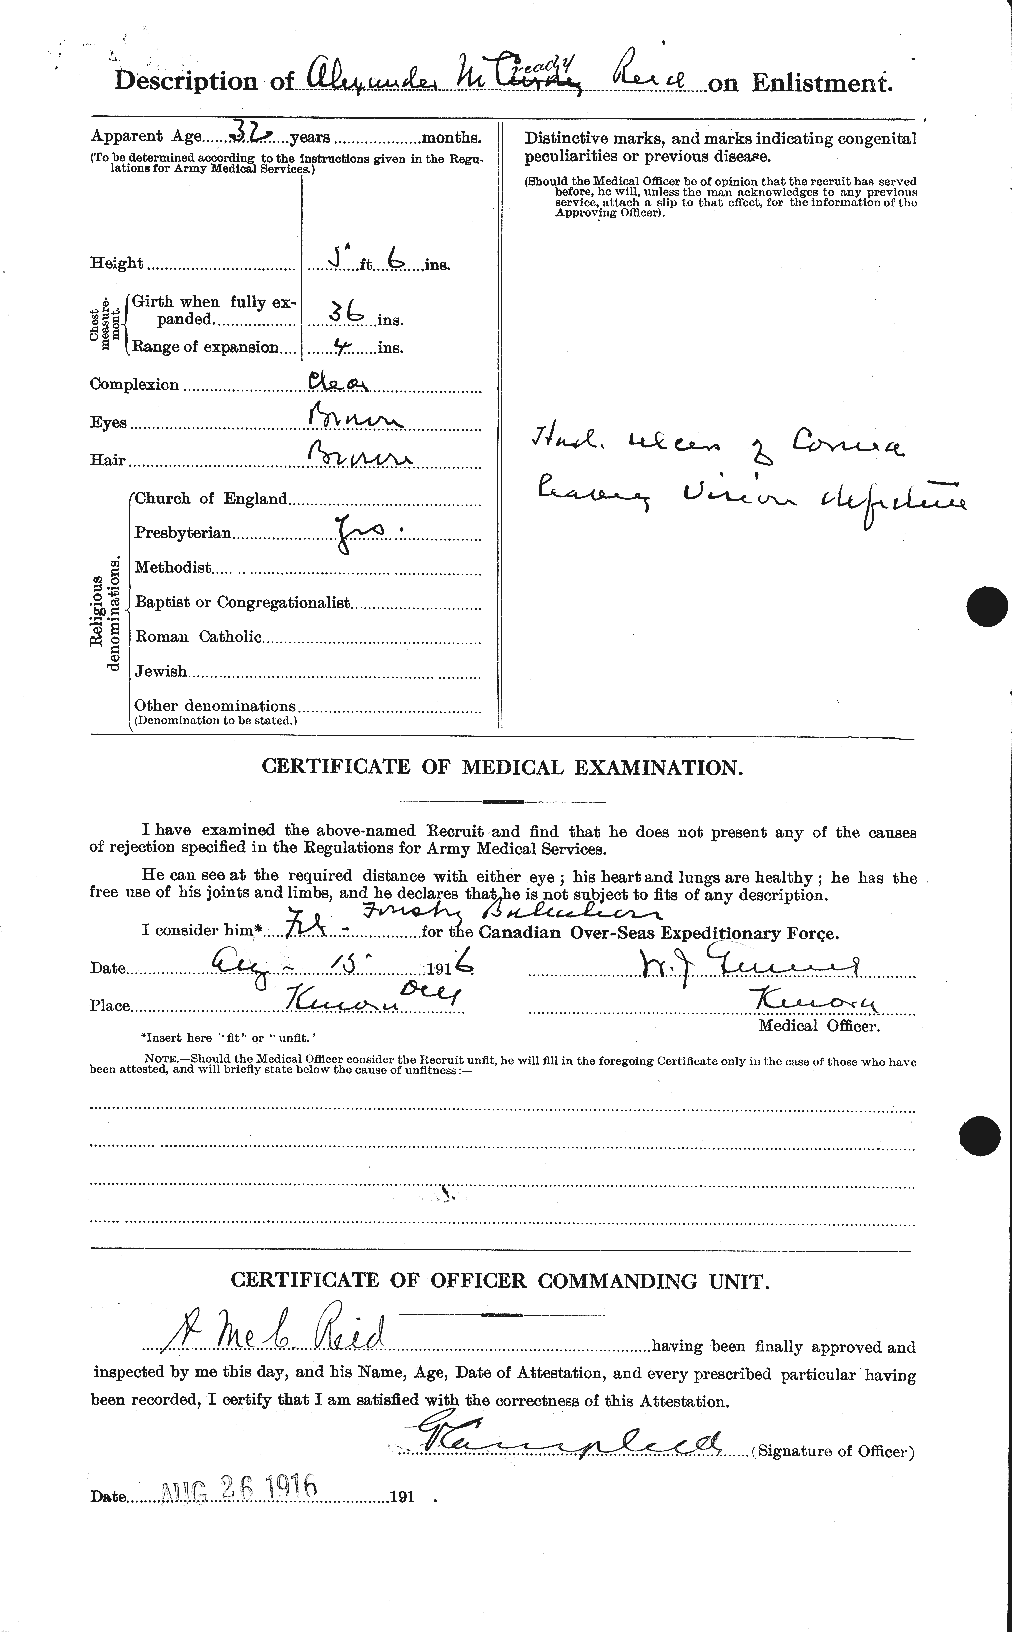 Personnel Records of the First World War - CEF 597785b